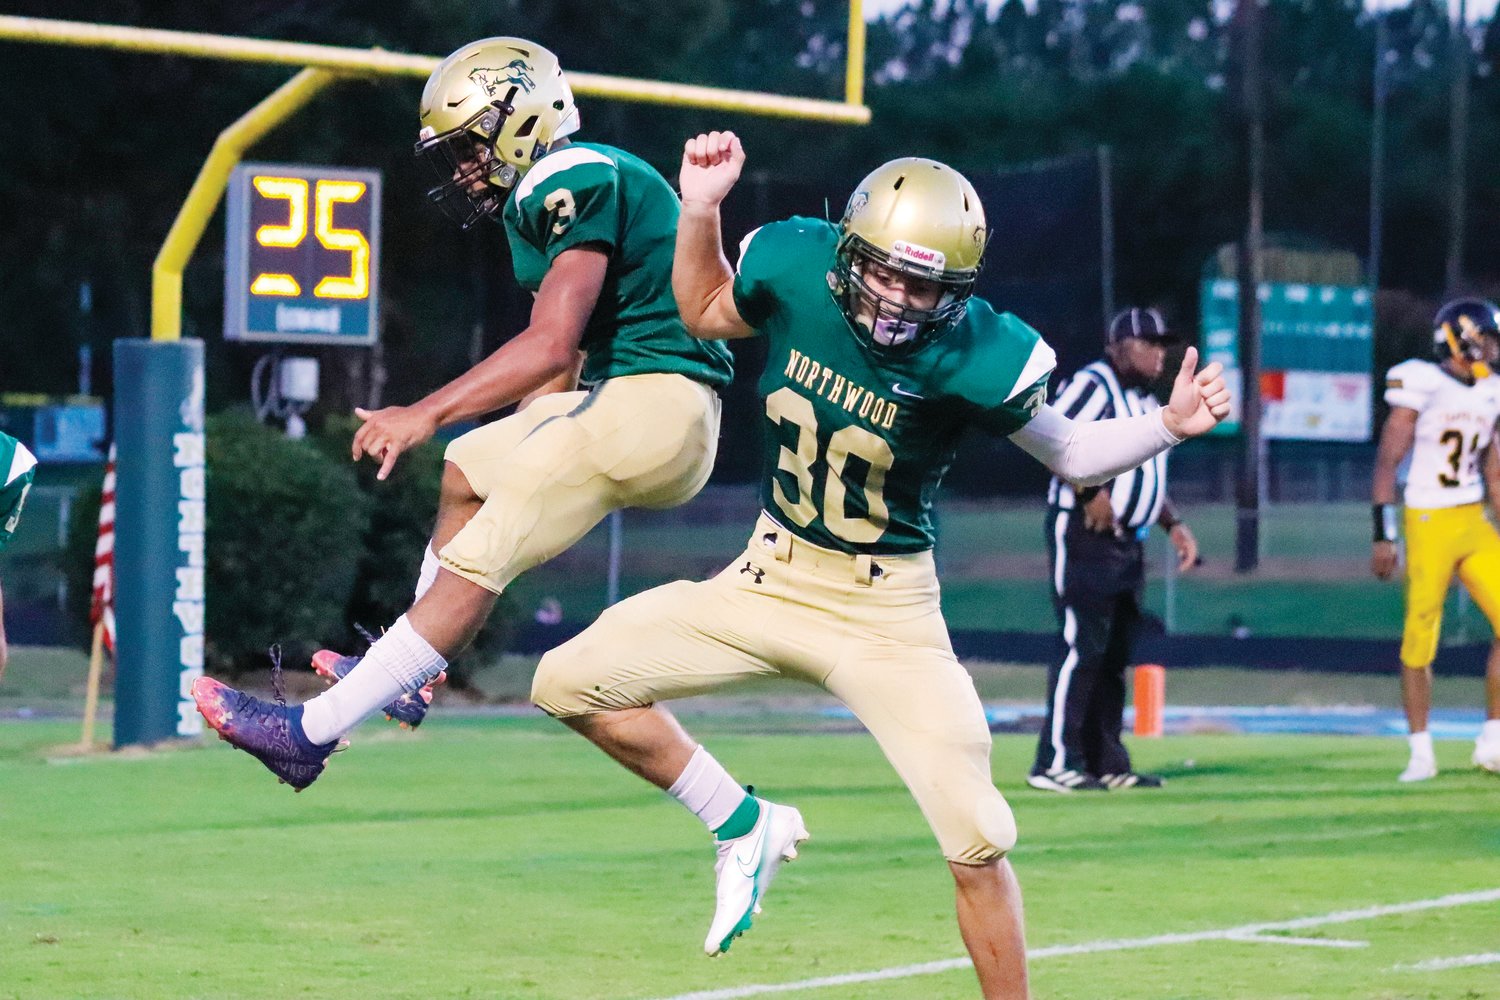 Northwood seniors Jalen Paige (3) and Braden Meacham (30) celebrate after Paige scores one of his two touchdowns on the night during the Chargers' 36-29 loss to Chapel Hill in Pittsboro on Friday night. Paige was one of two Chargers with a rushing touchdown against the Tigers.